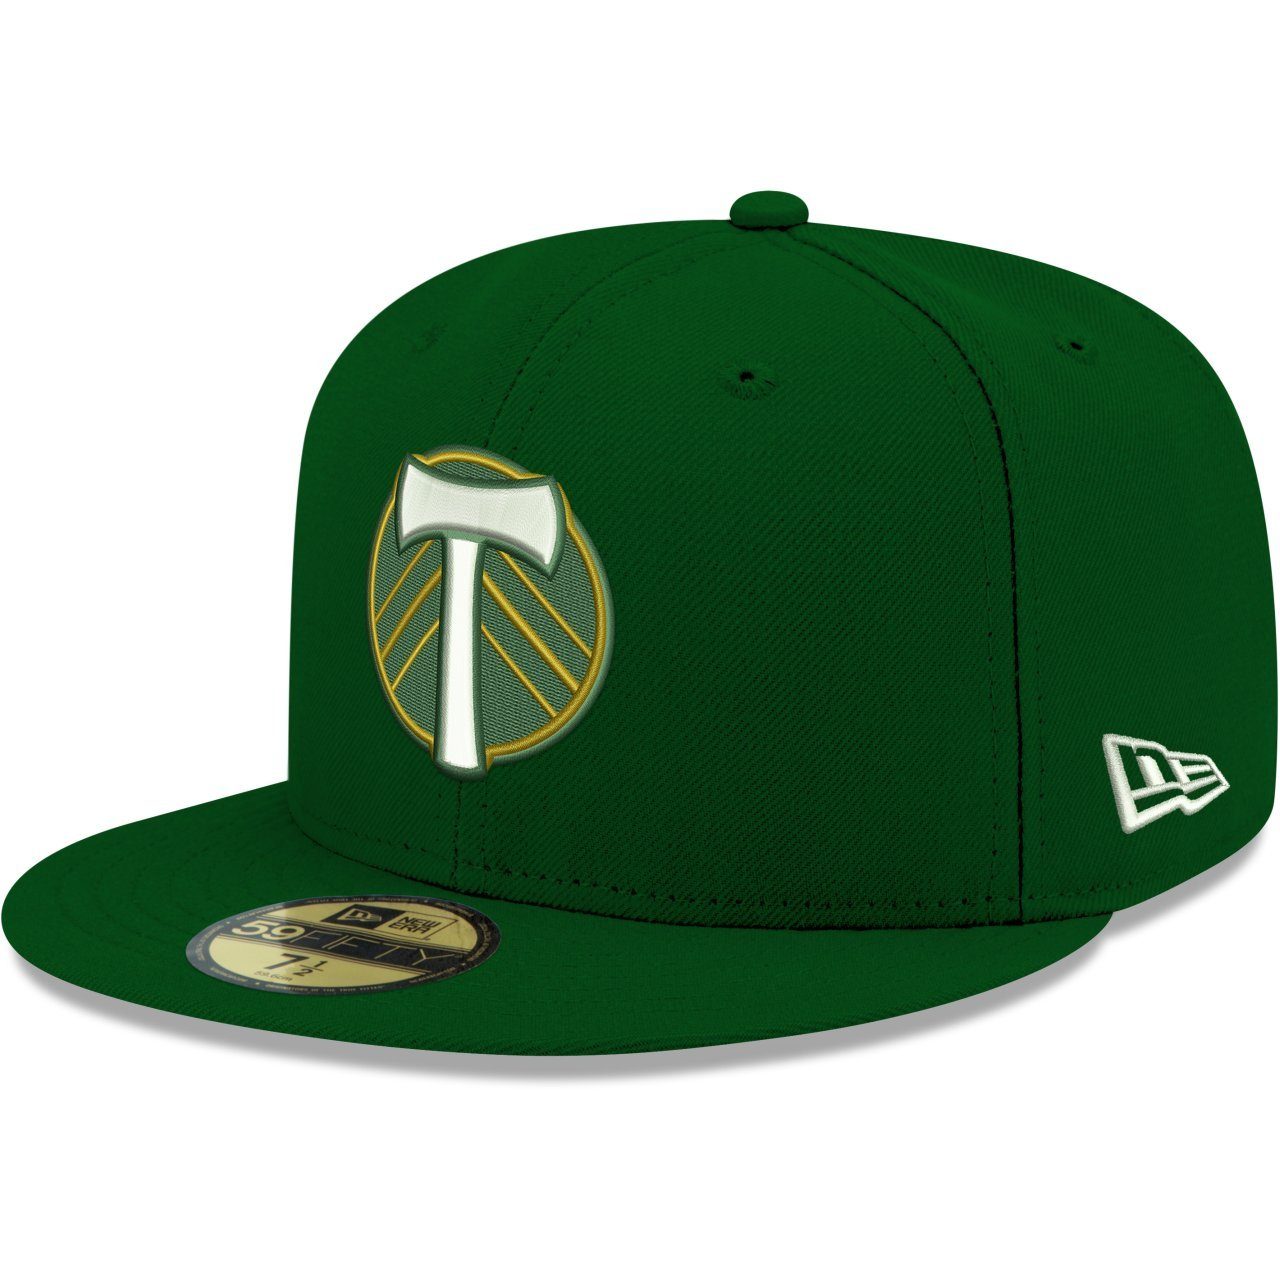 New Era Fitted Cap 59Fifty MLS Portland Timbers